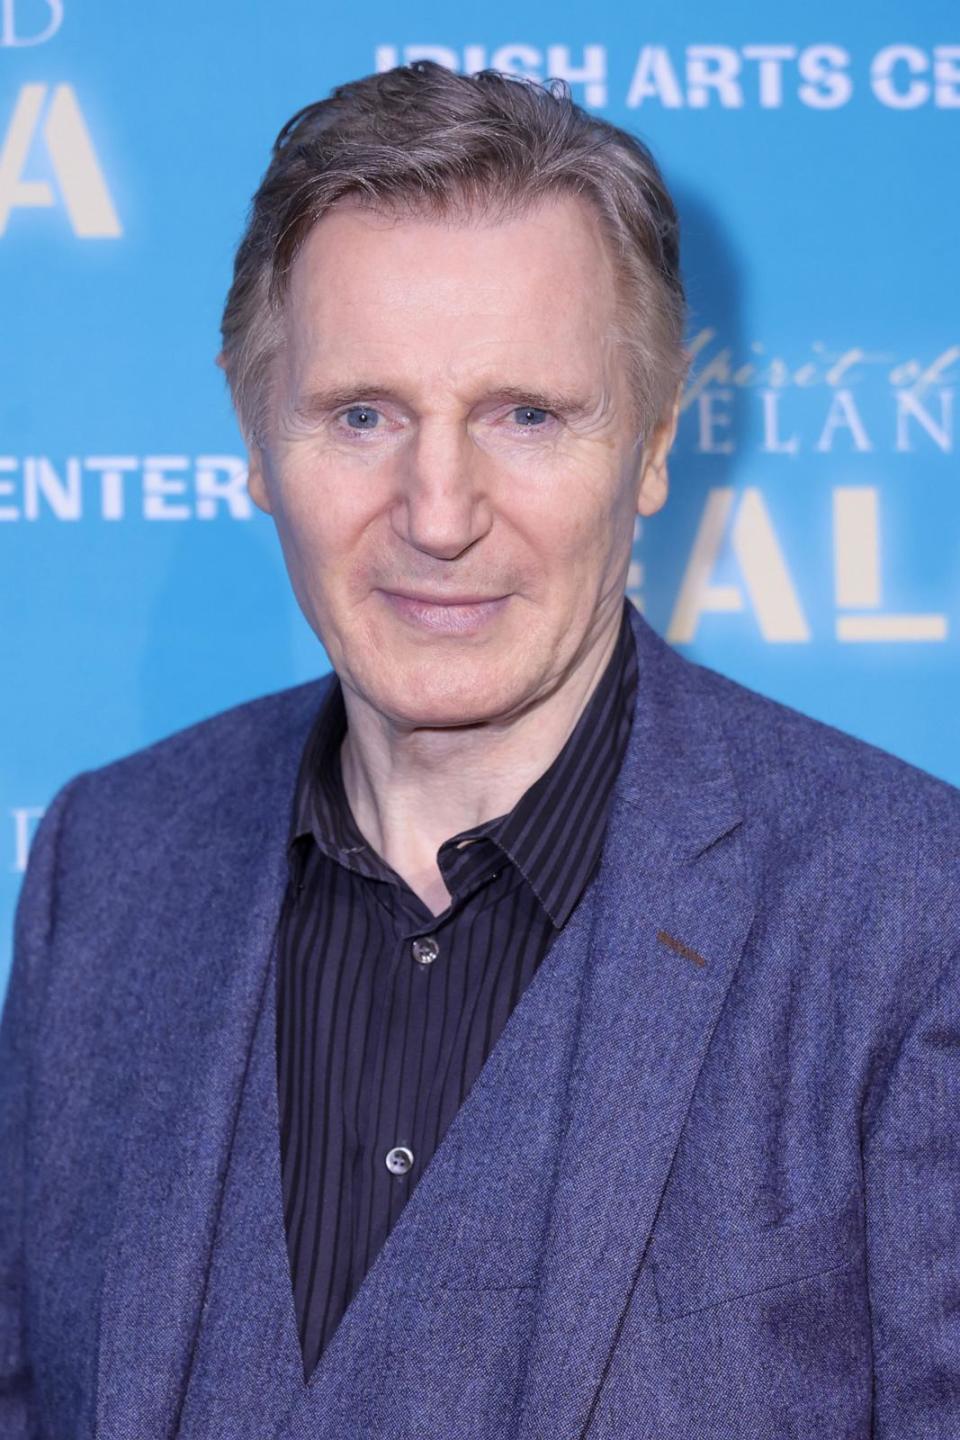 PHOTO: In this Nov. 17, 2023, file photo, Liam Neeson attends an event in New York. (Michael Loccisano/Getty Images)